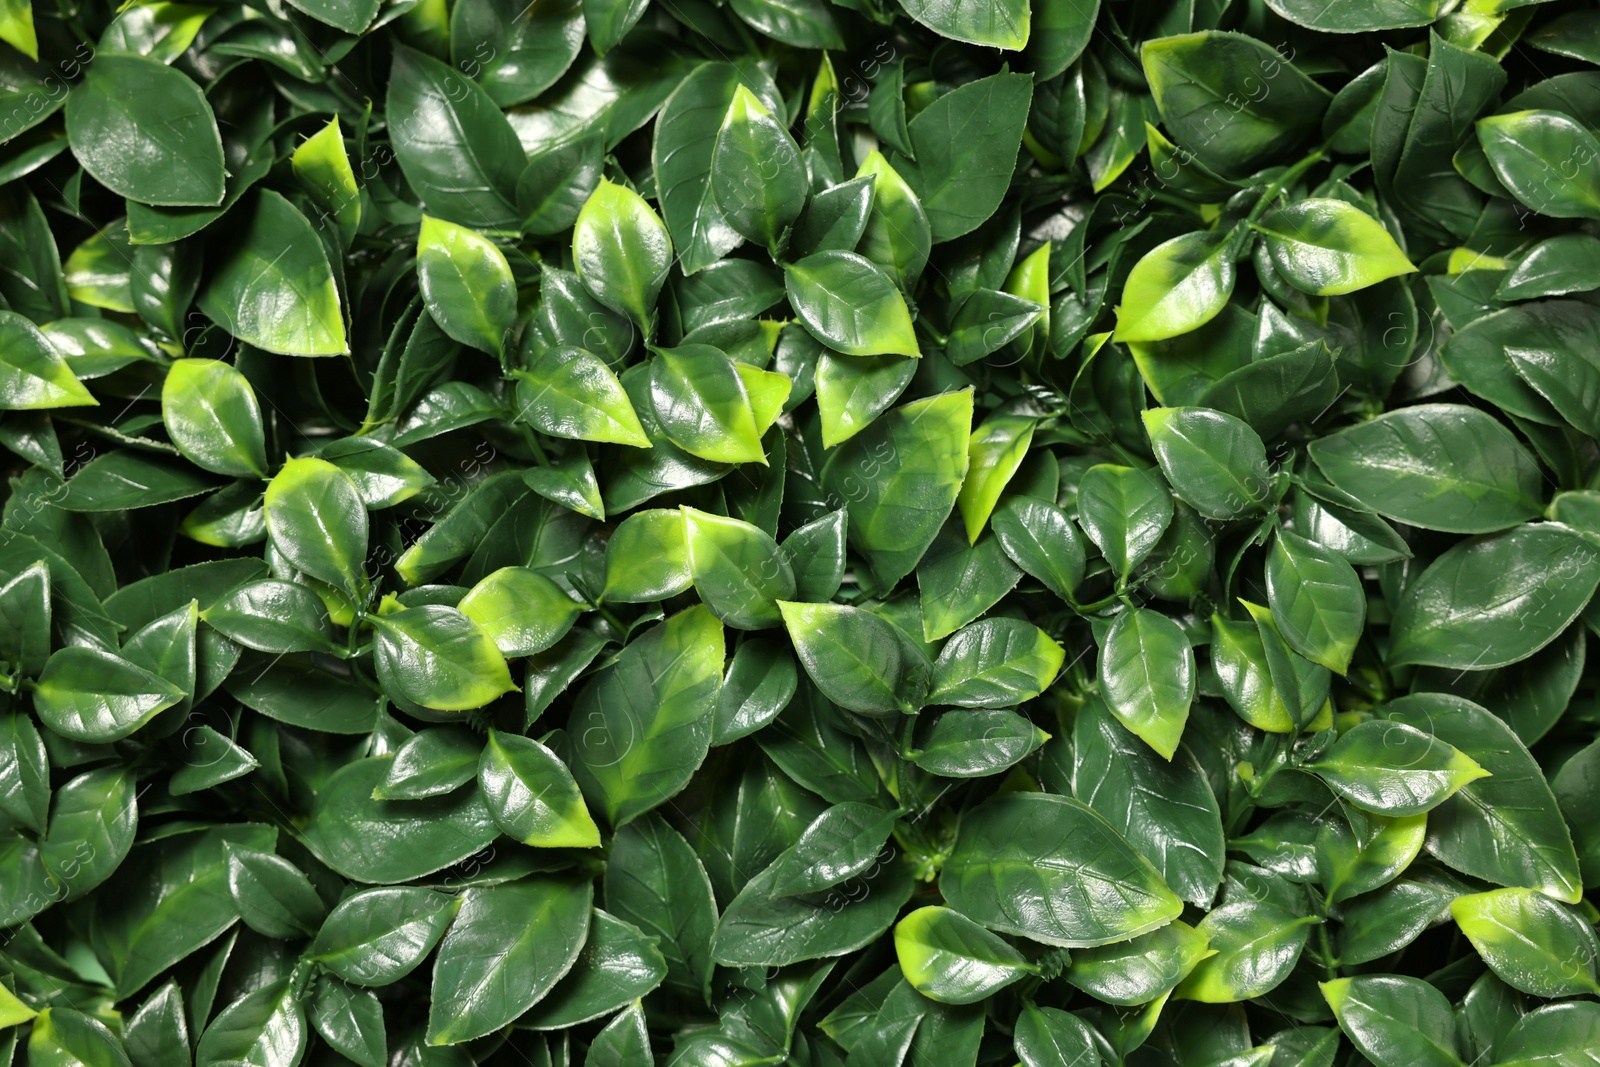 Photo of Green artificial plants as background, closeup view